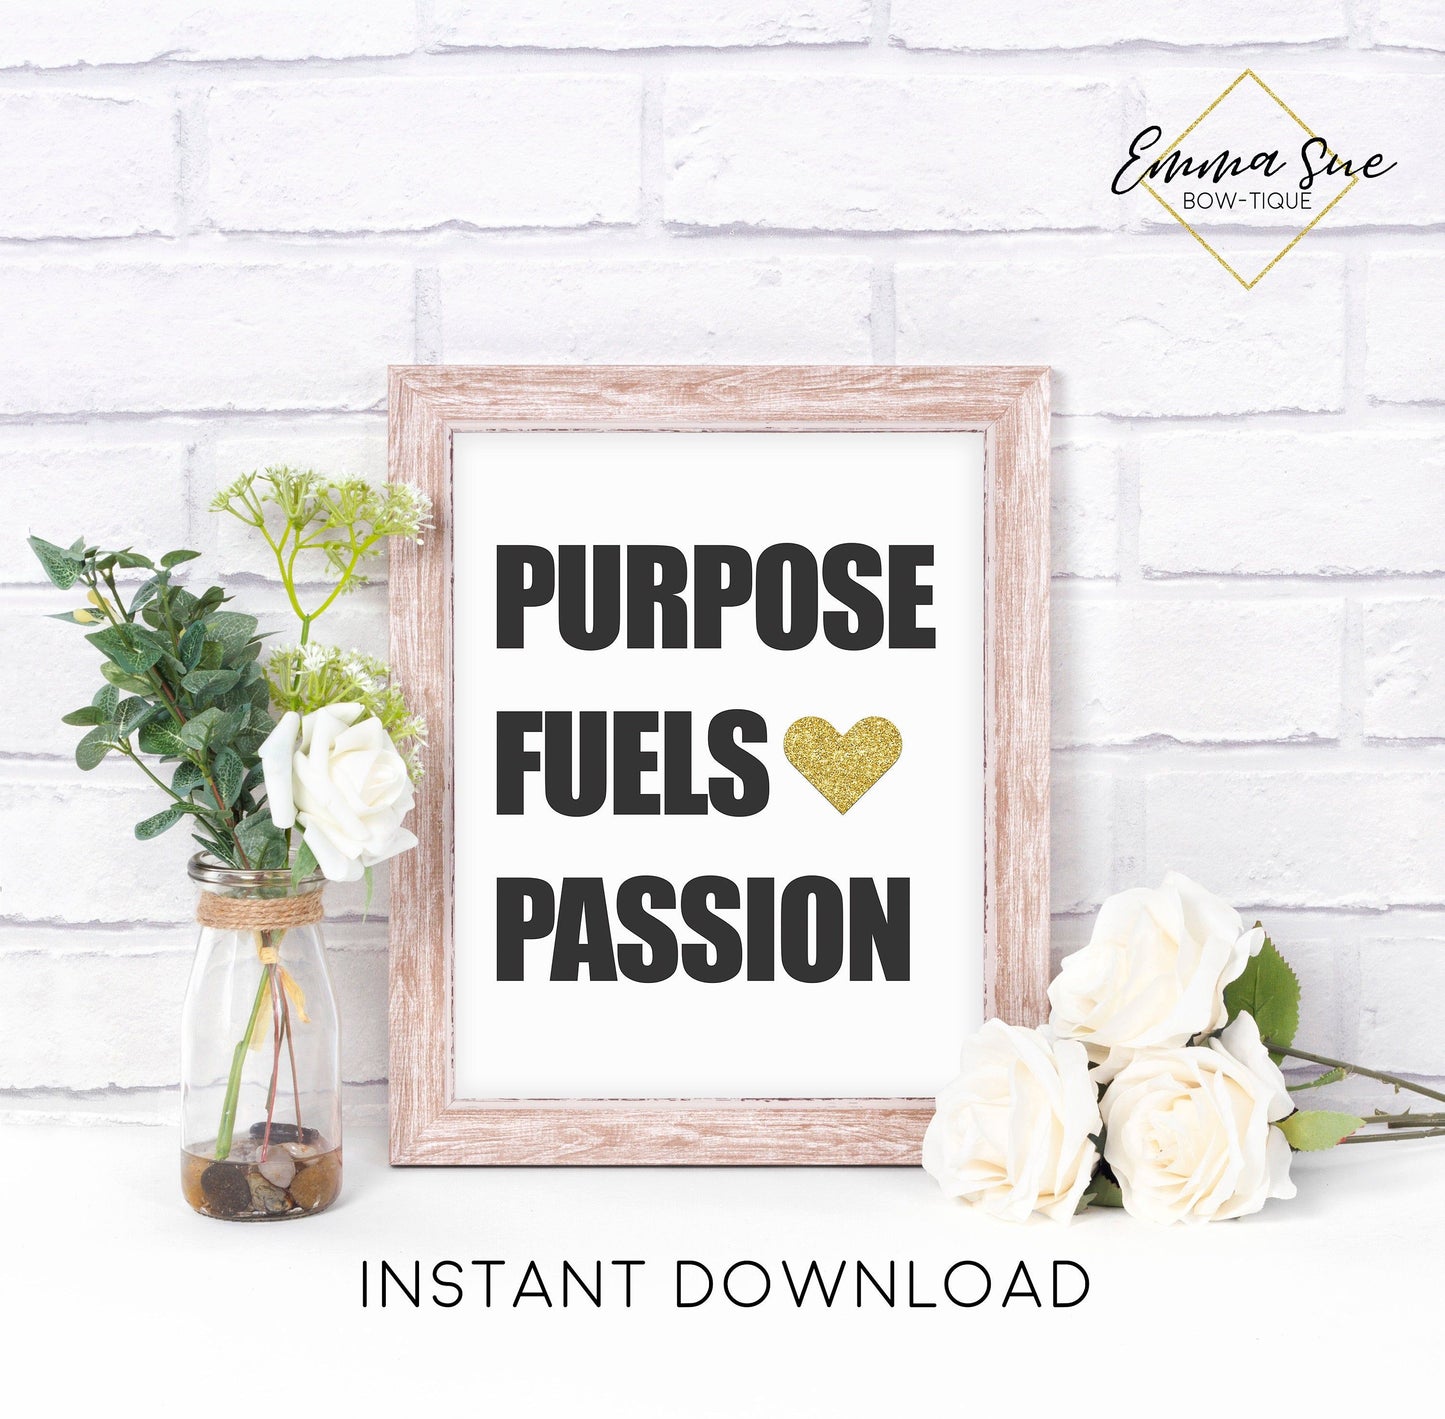 Purpose fuels Passion - Boss Babe Home Office Motivational Quote Printable Sign Wall Art Digital File